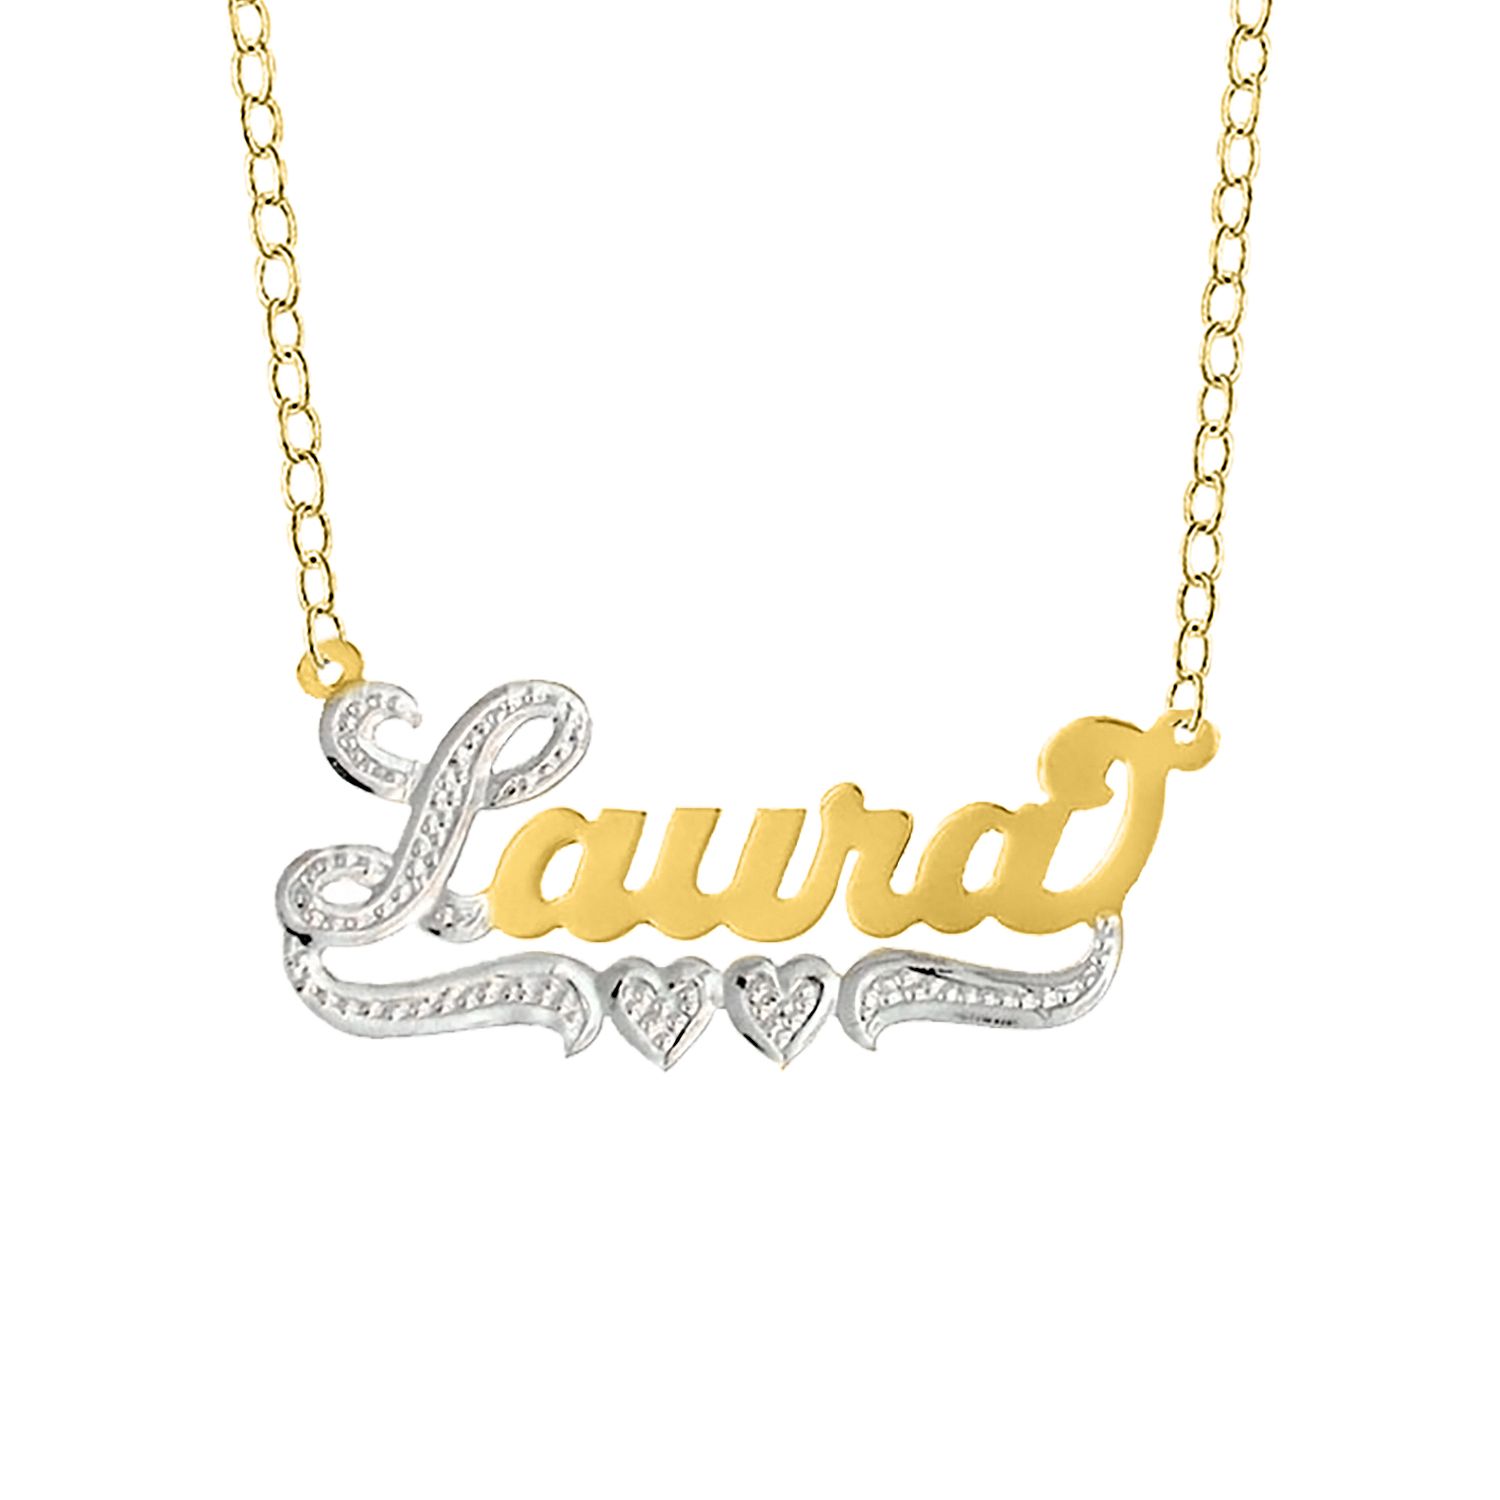 Fingerhut Jay Aimee Designs 14k Gold Plated Sterling Silver Personalized Name Pendant Necklace